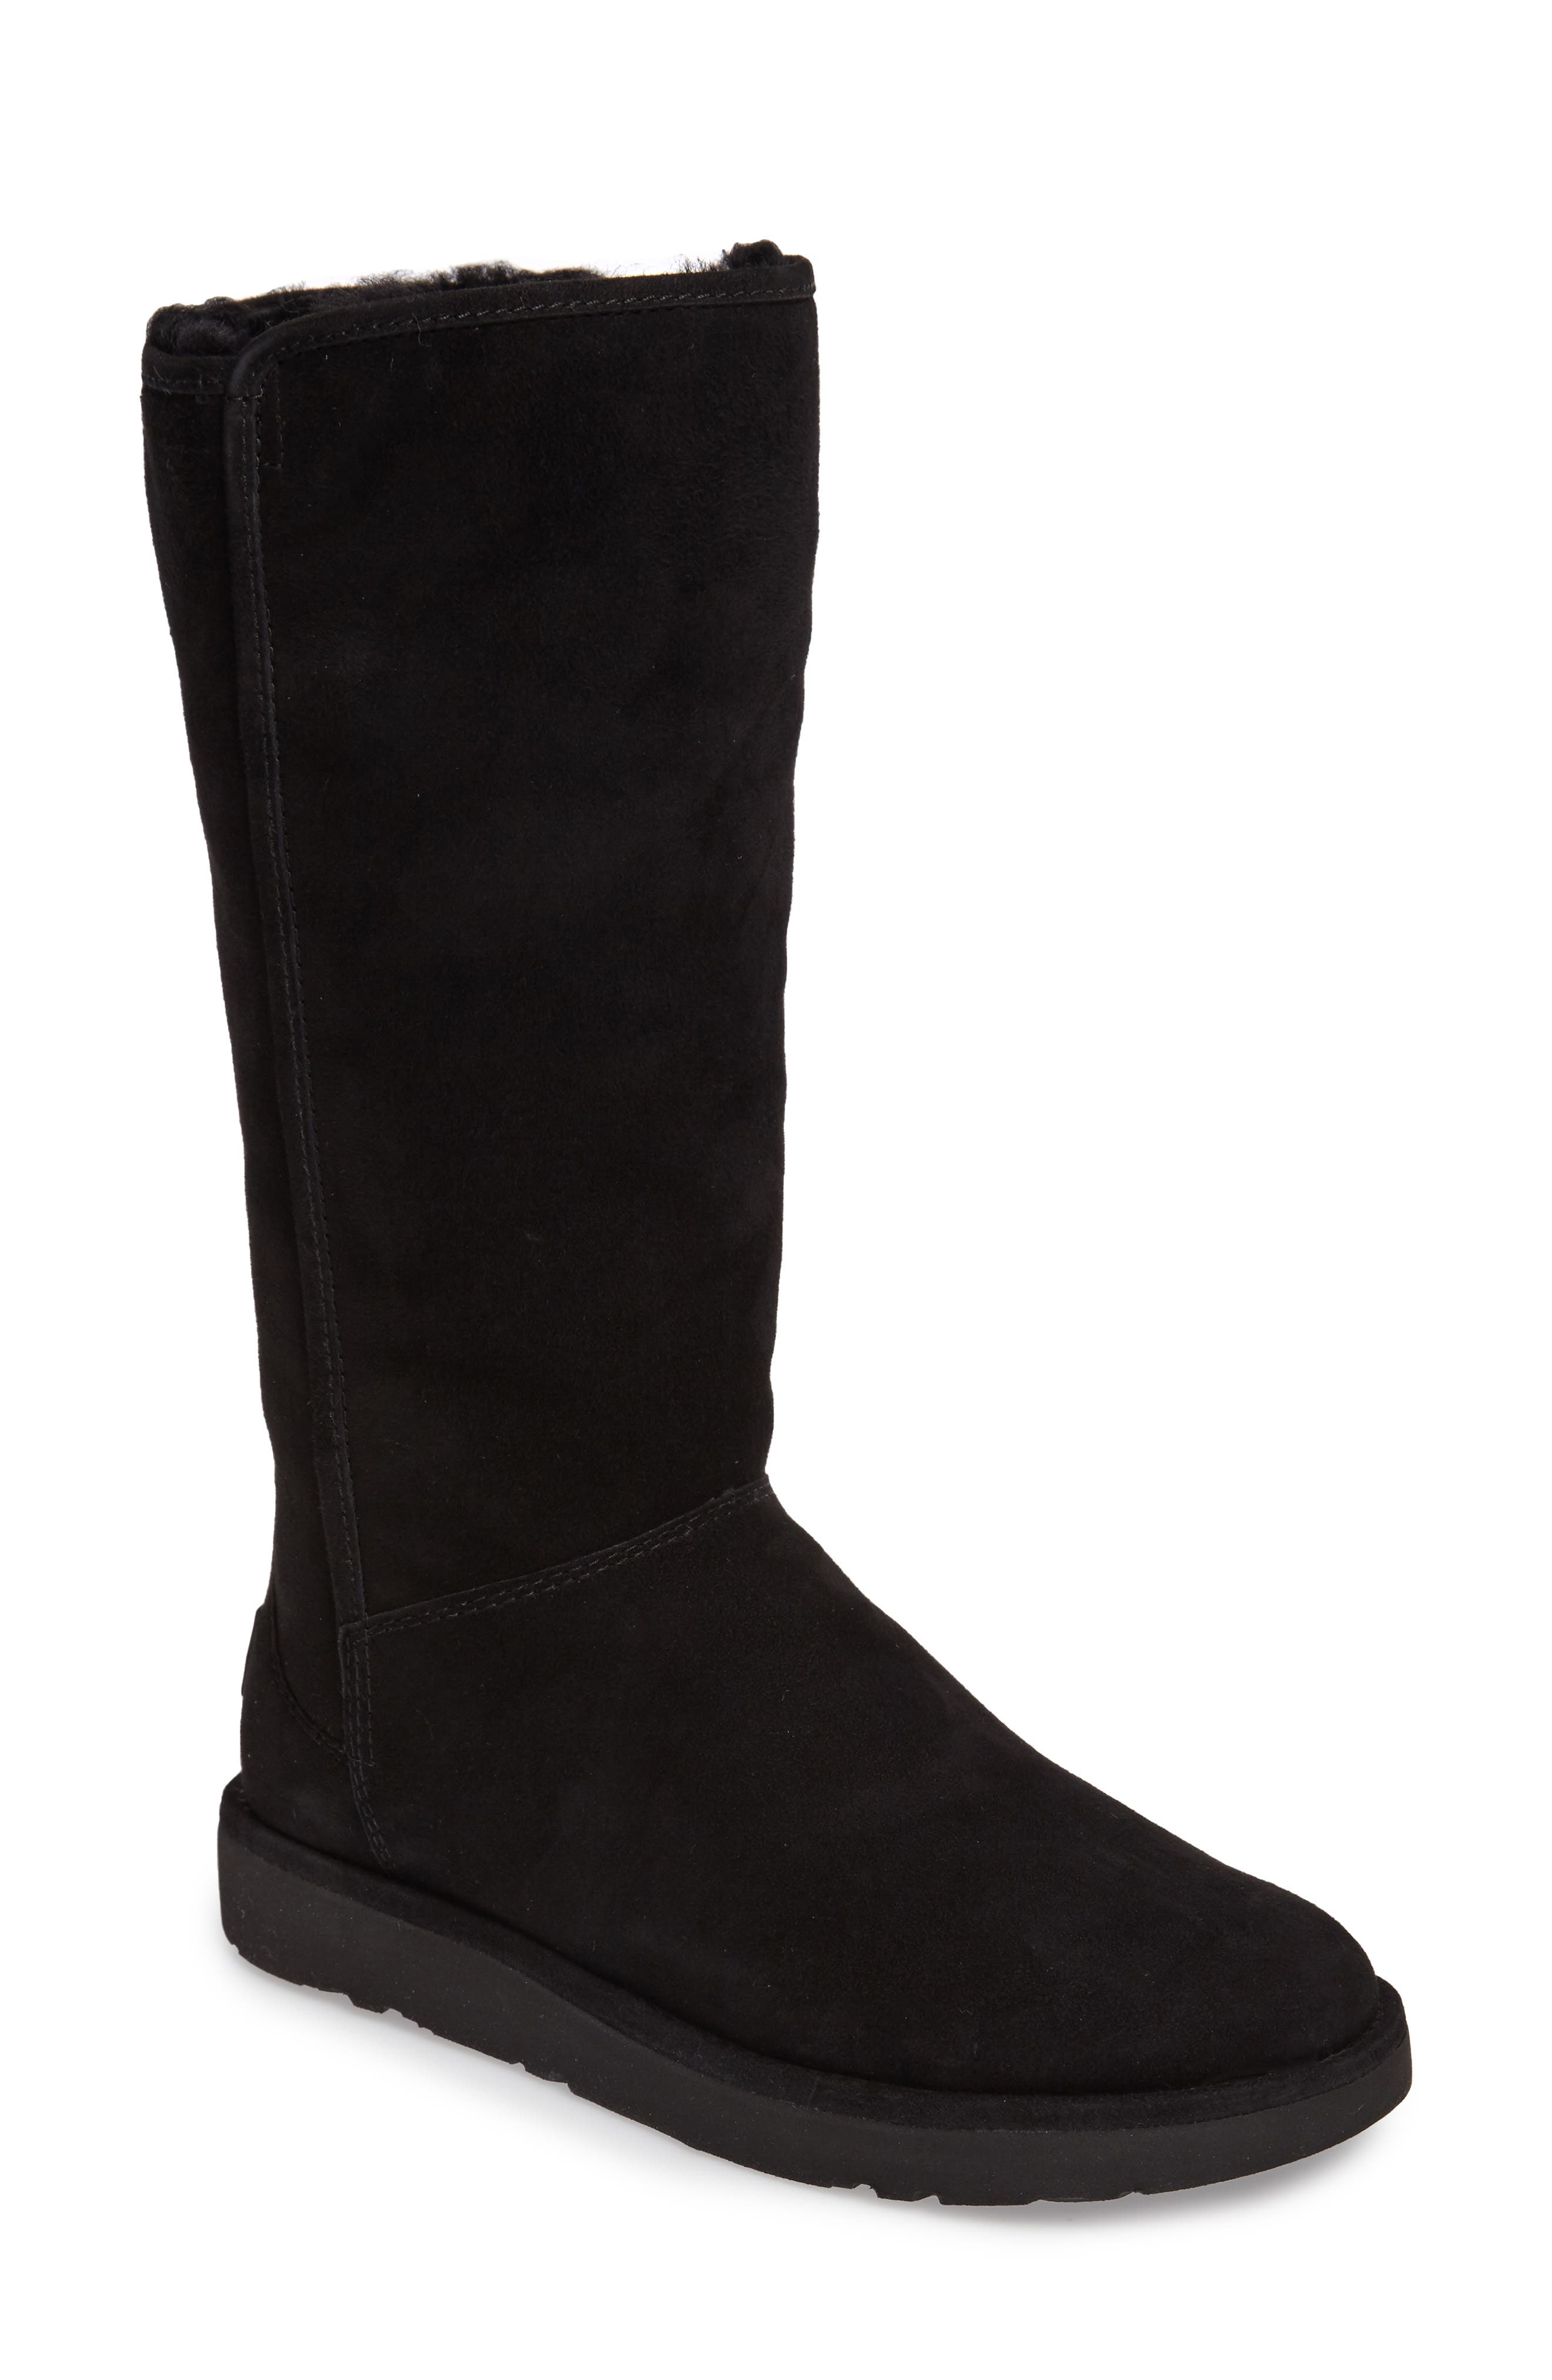 ugg abree 11 boots